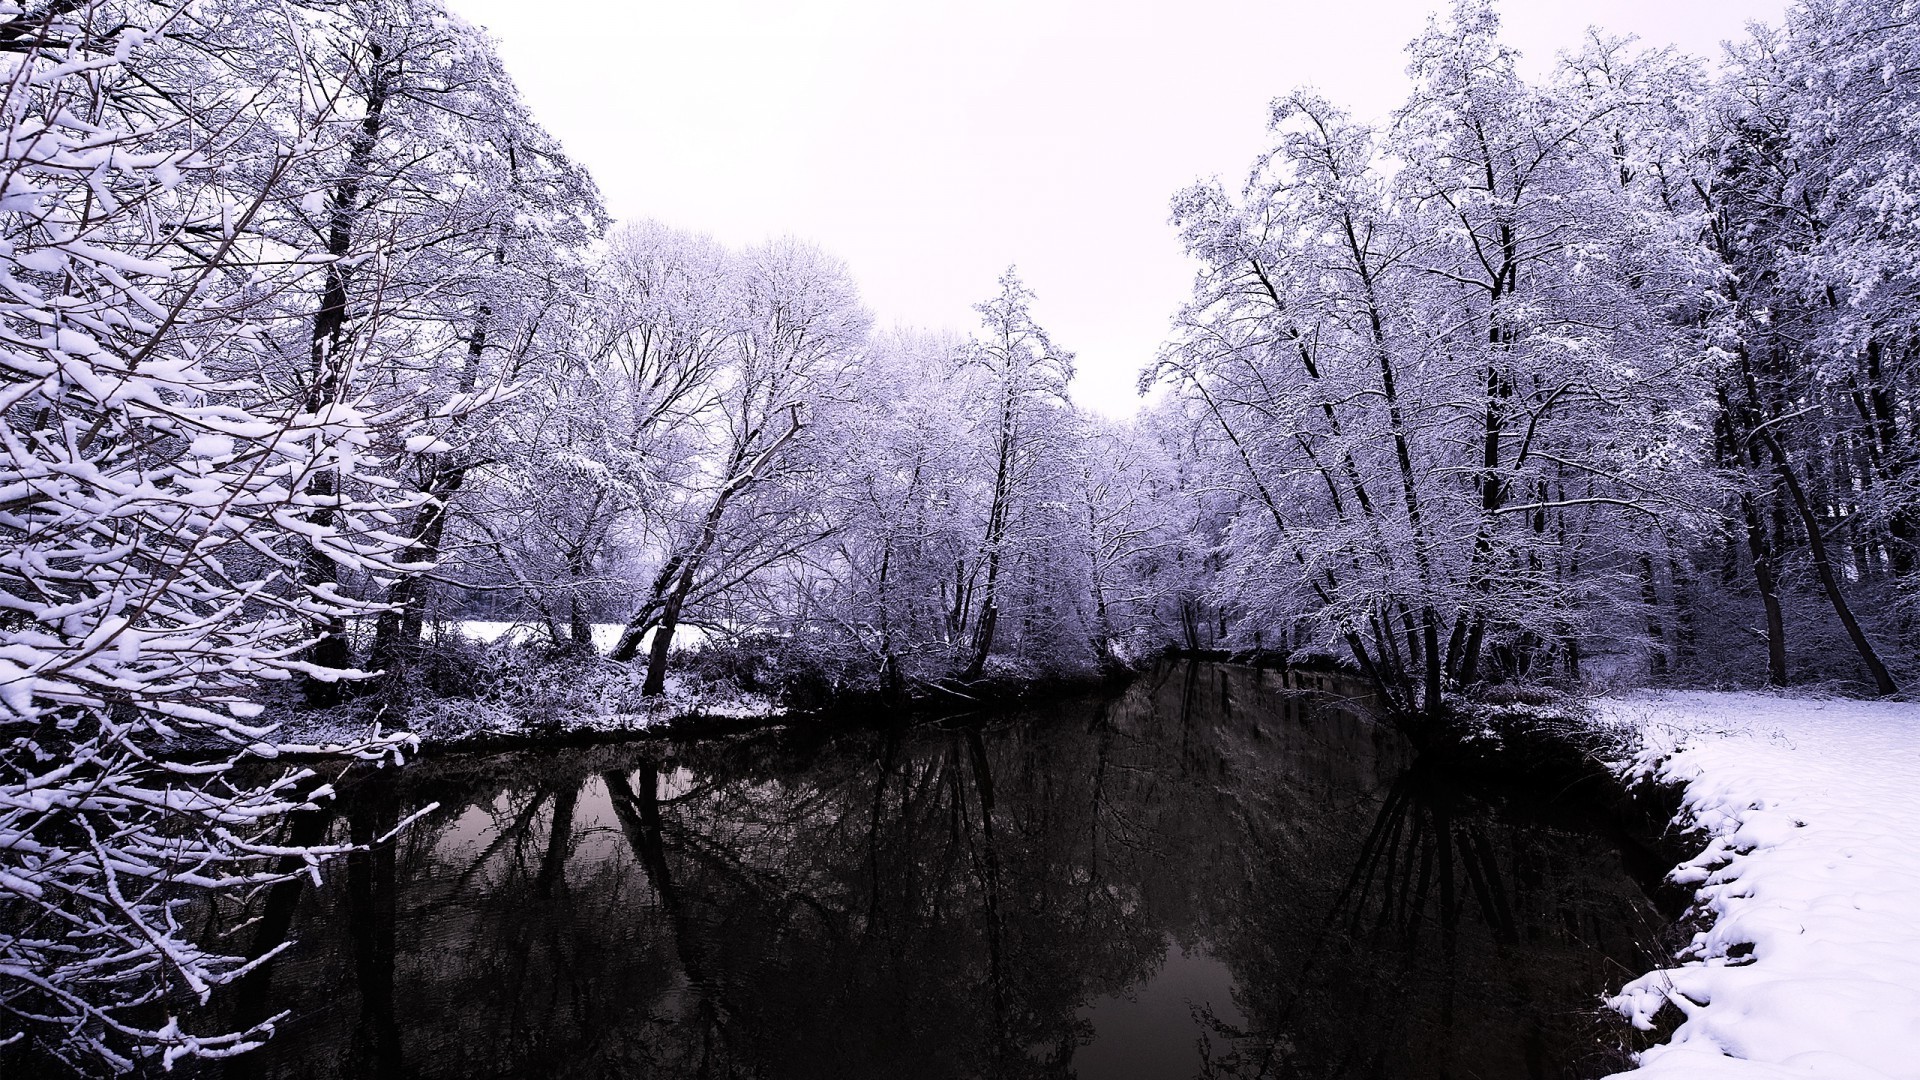 rivers ponds and streams tree winter wood snow landscape cold nature frost park scenic season ice branch fog scenery outdoors frozen